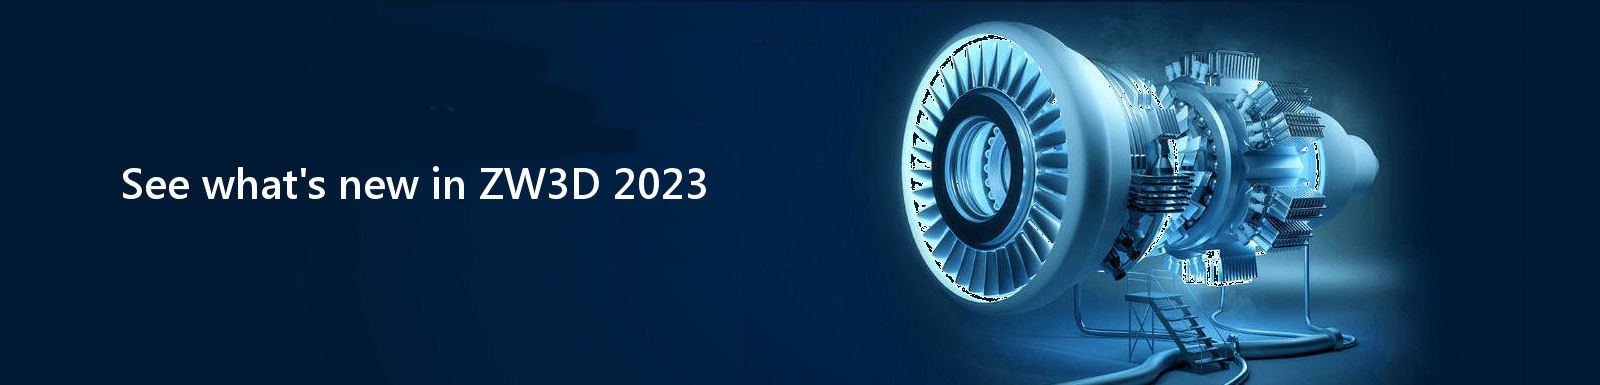 whats new in 2023